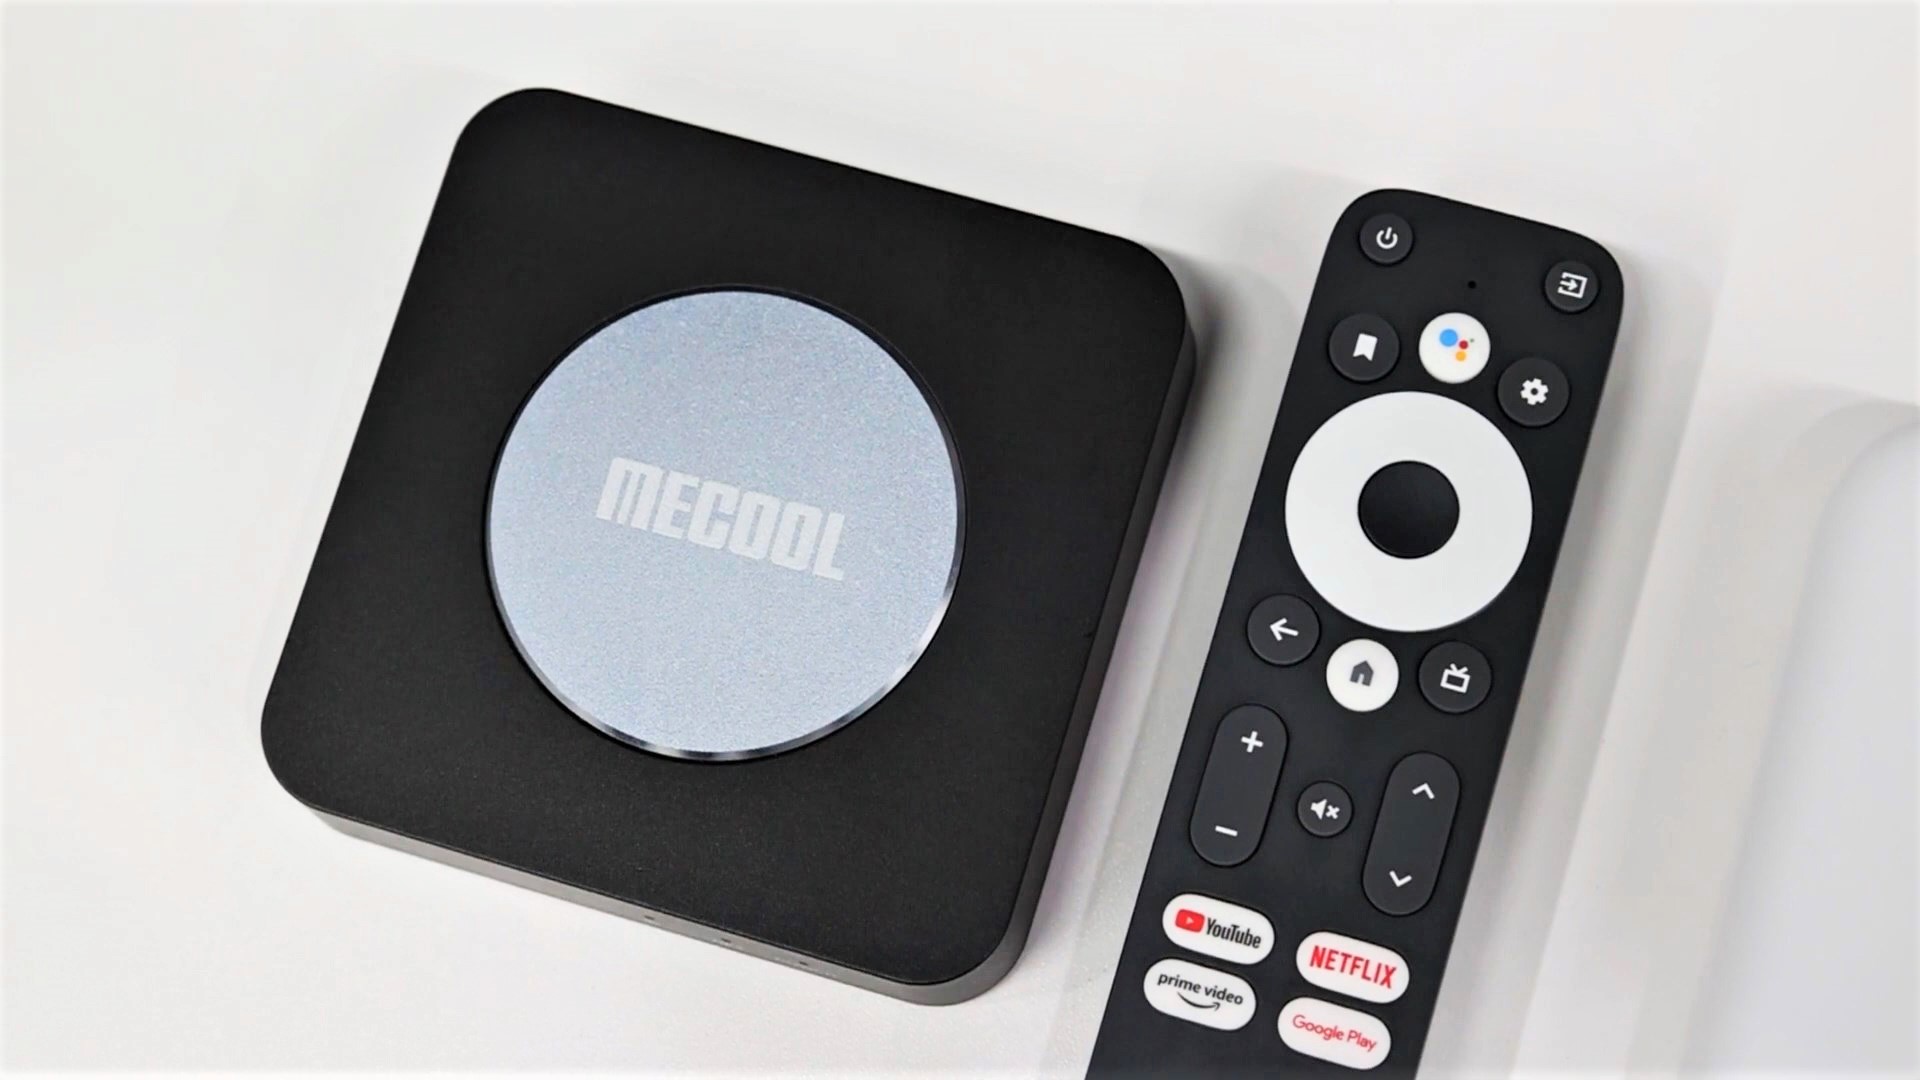 REVIEW: Mecool KM2, new Android TV-Box with Netflix 4K support